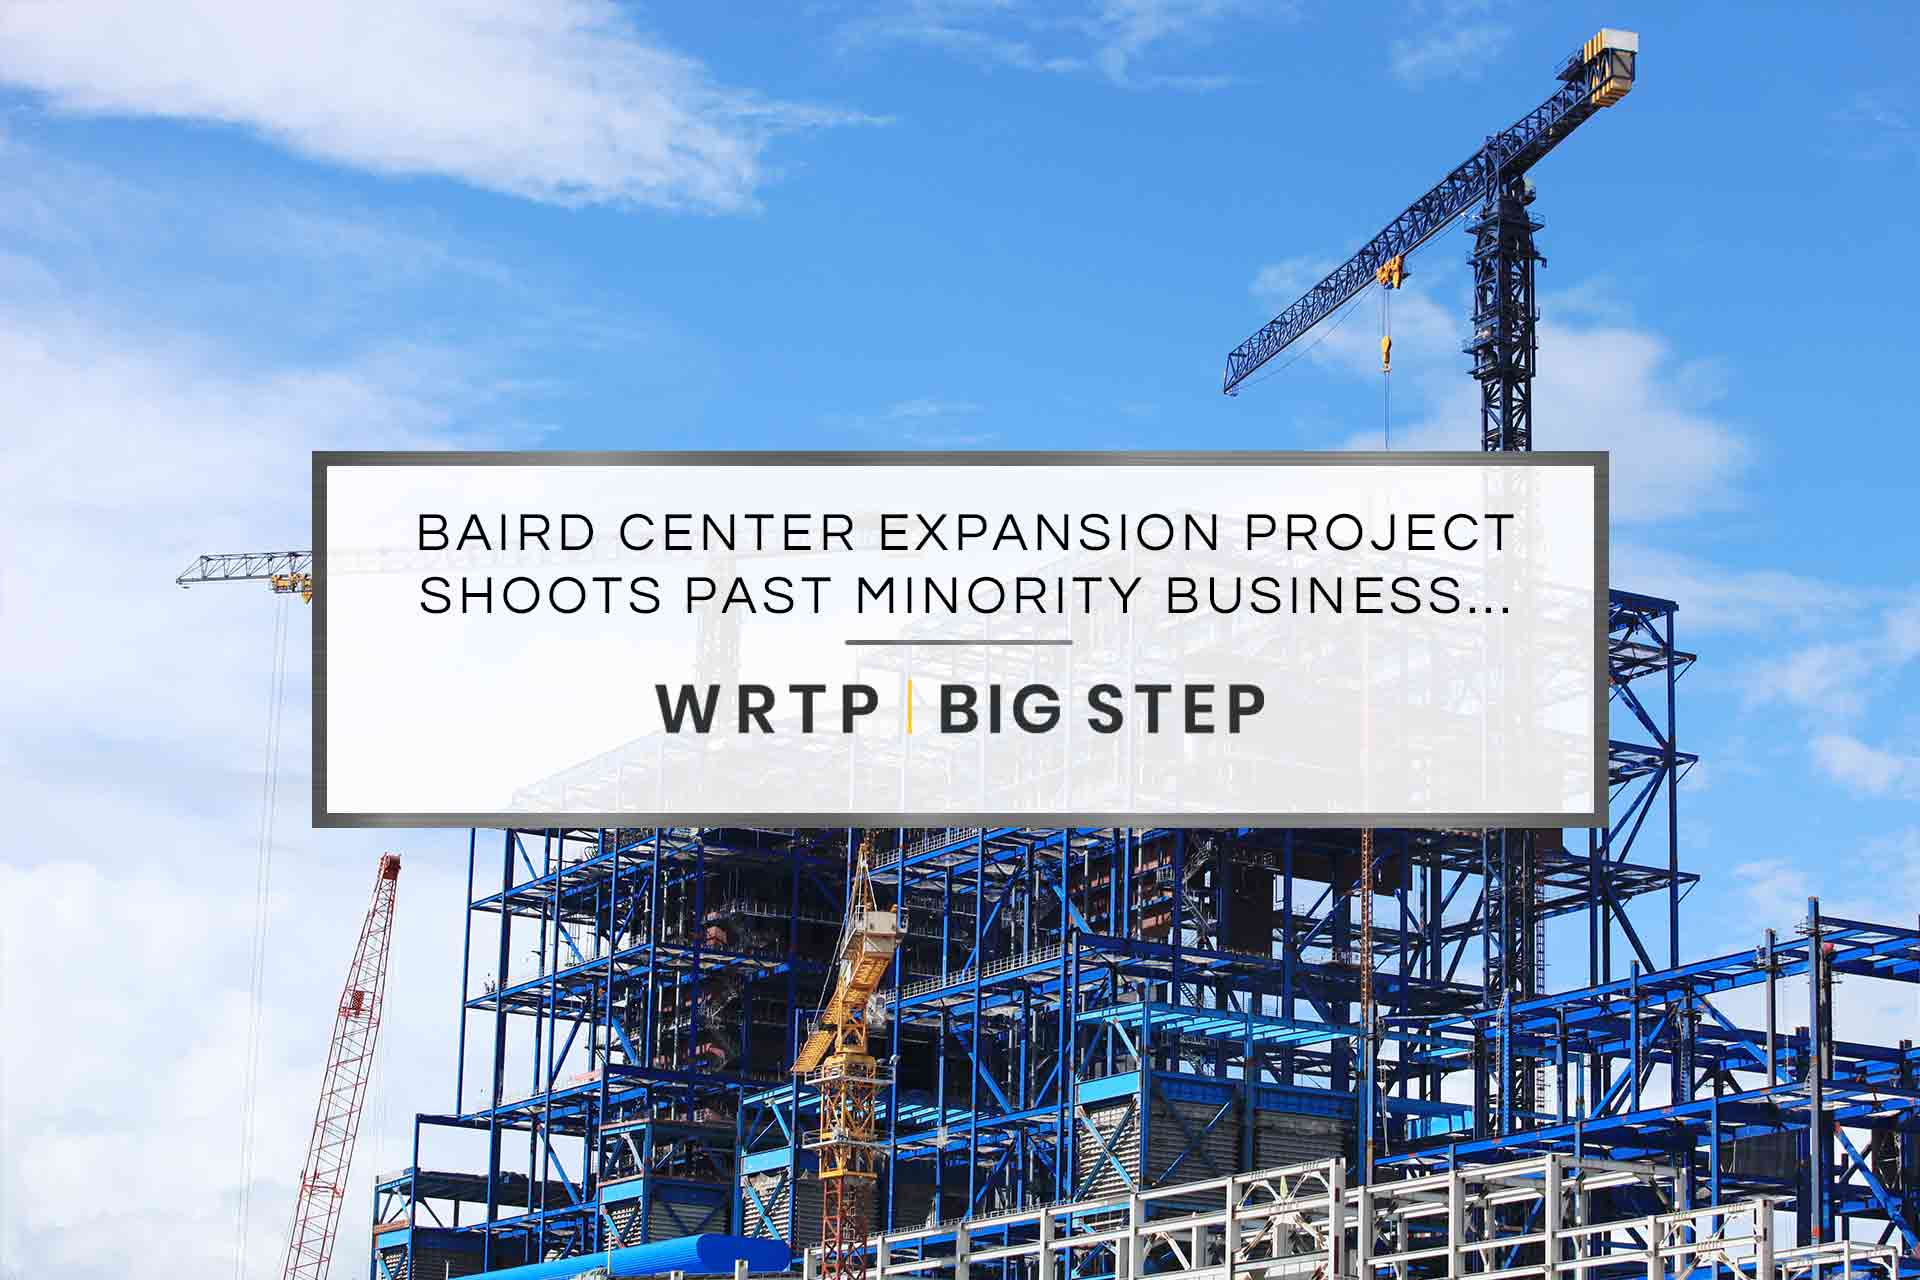 Baird Center expansion project shoots past minority business and local resident goals | WRTP | BIG STEP